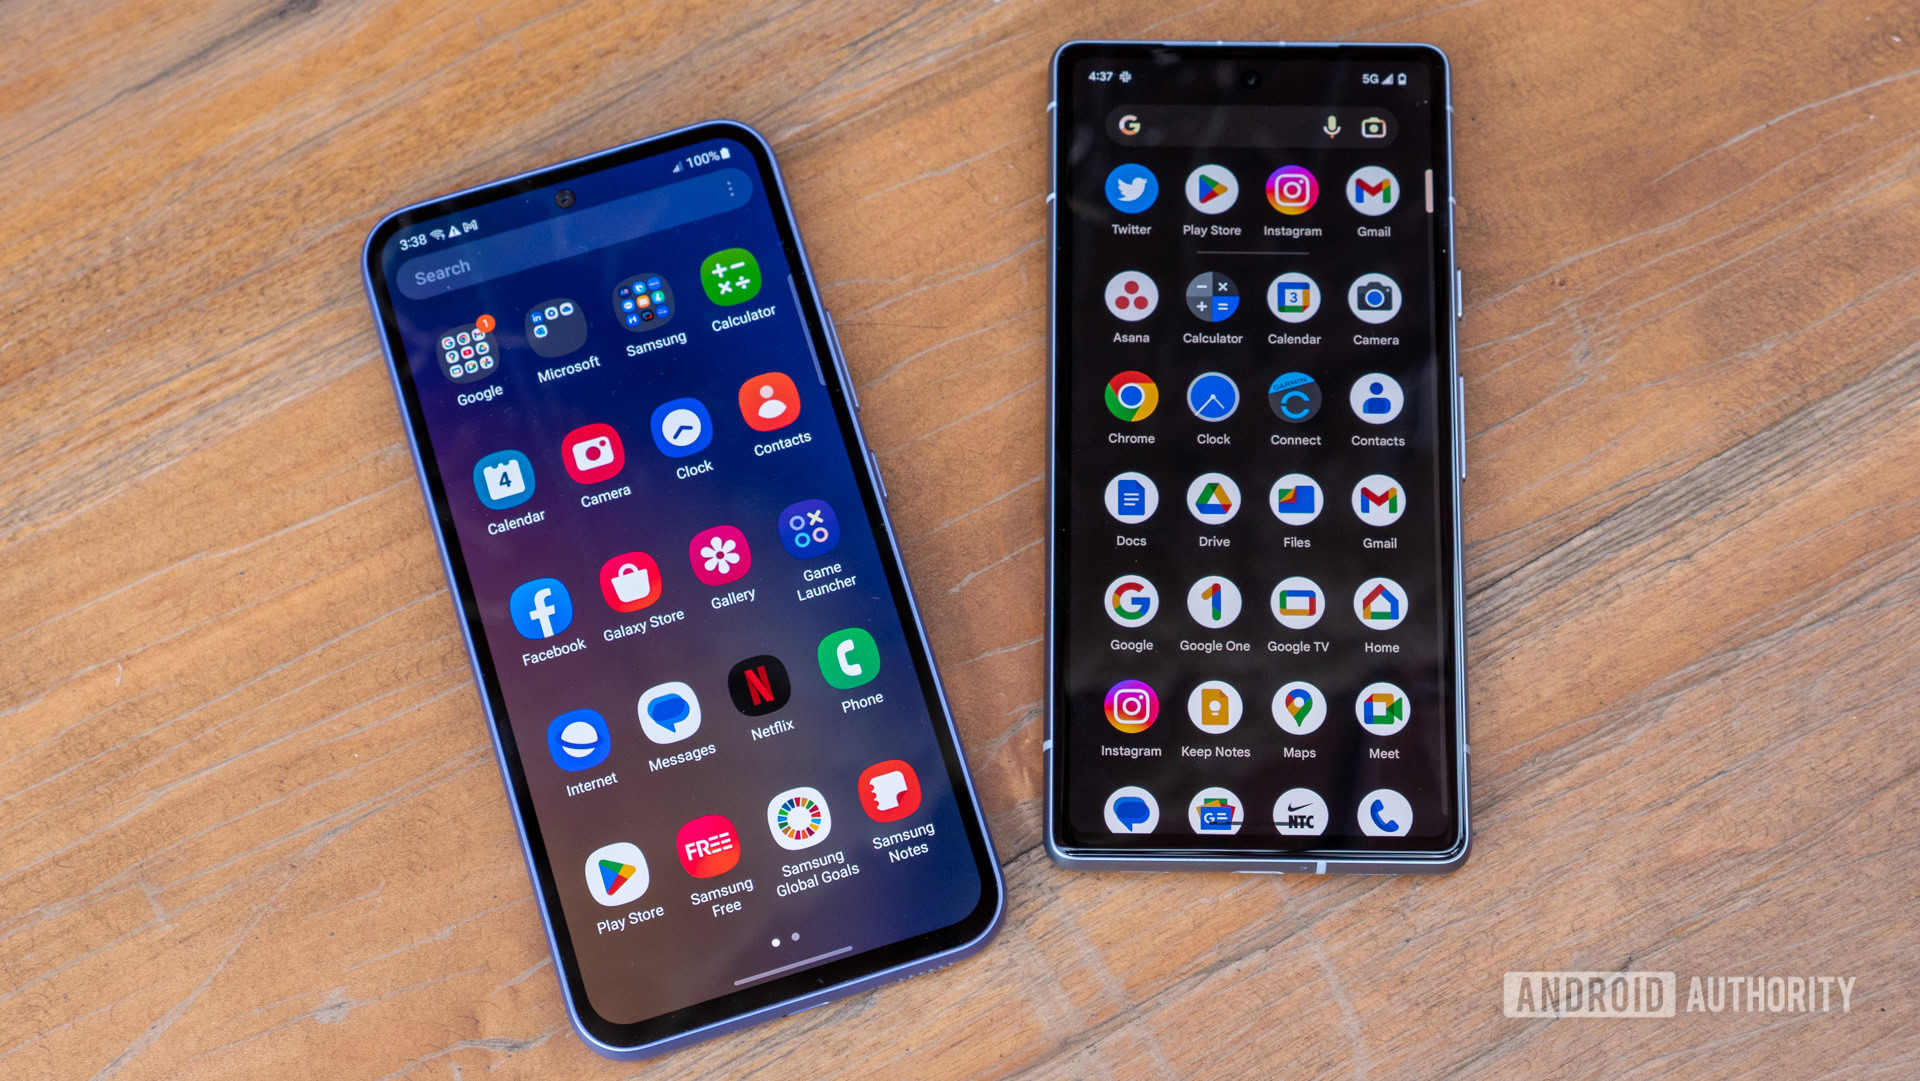 5 One UI features I’d like to see on Pixel phones